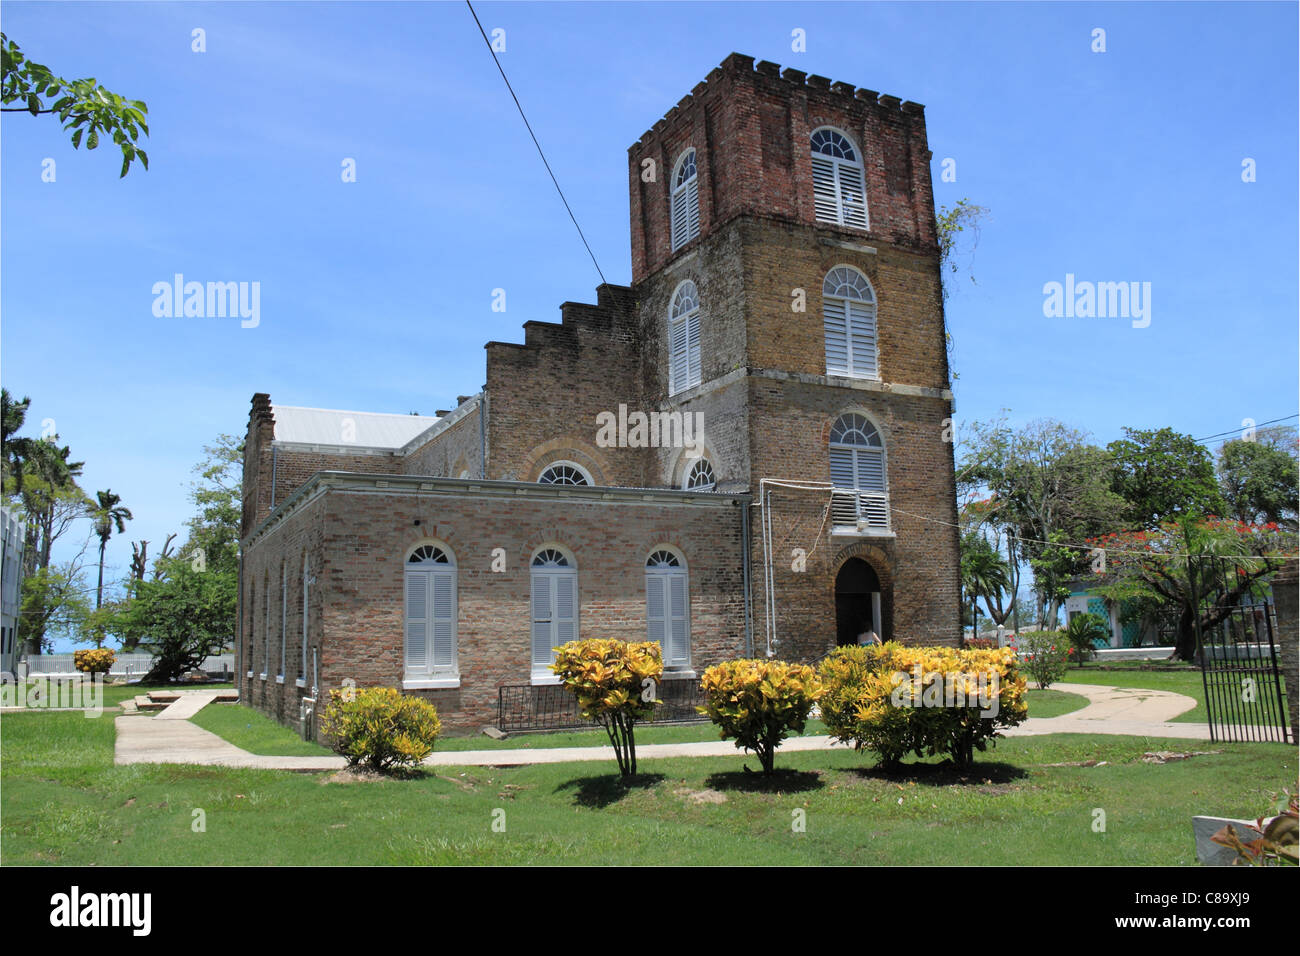 St John's Cathedral, the oldest anglican cathedral in Central America, begun 1812, Albert Street, Belize City, Belize, Caribbean Stock Photo